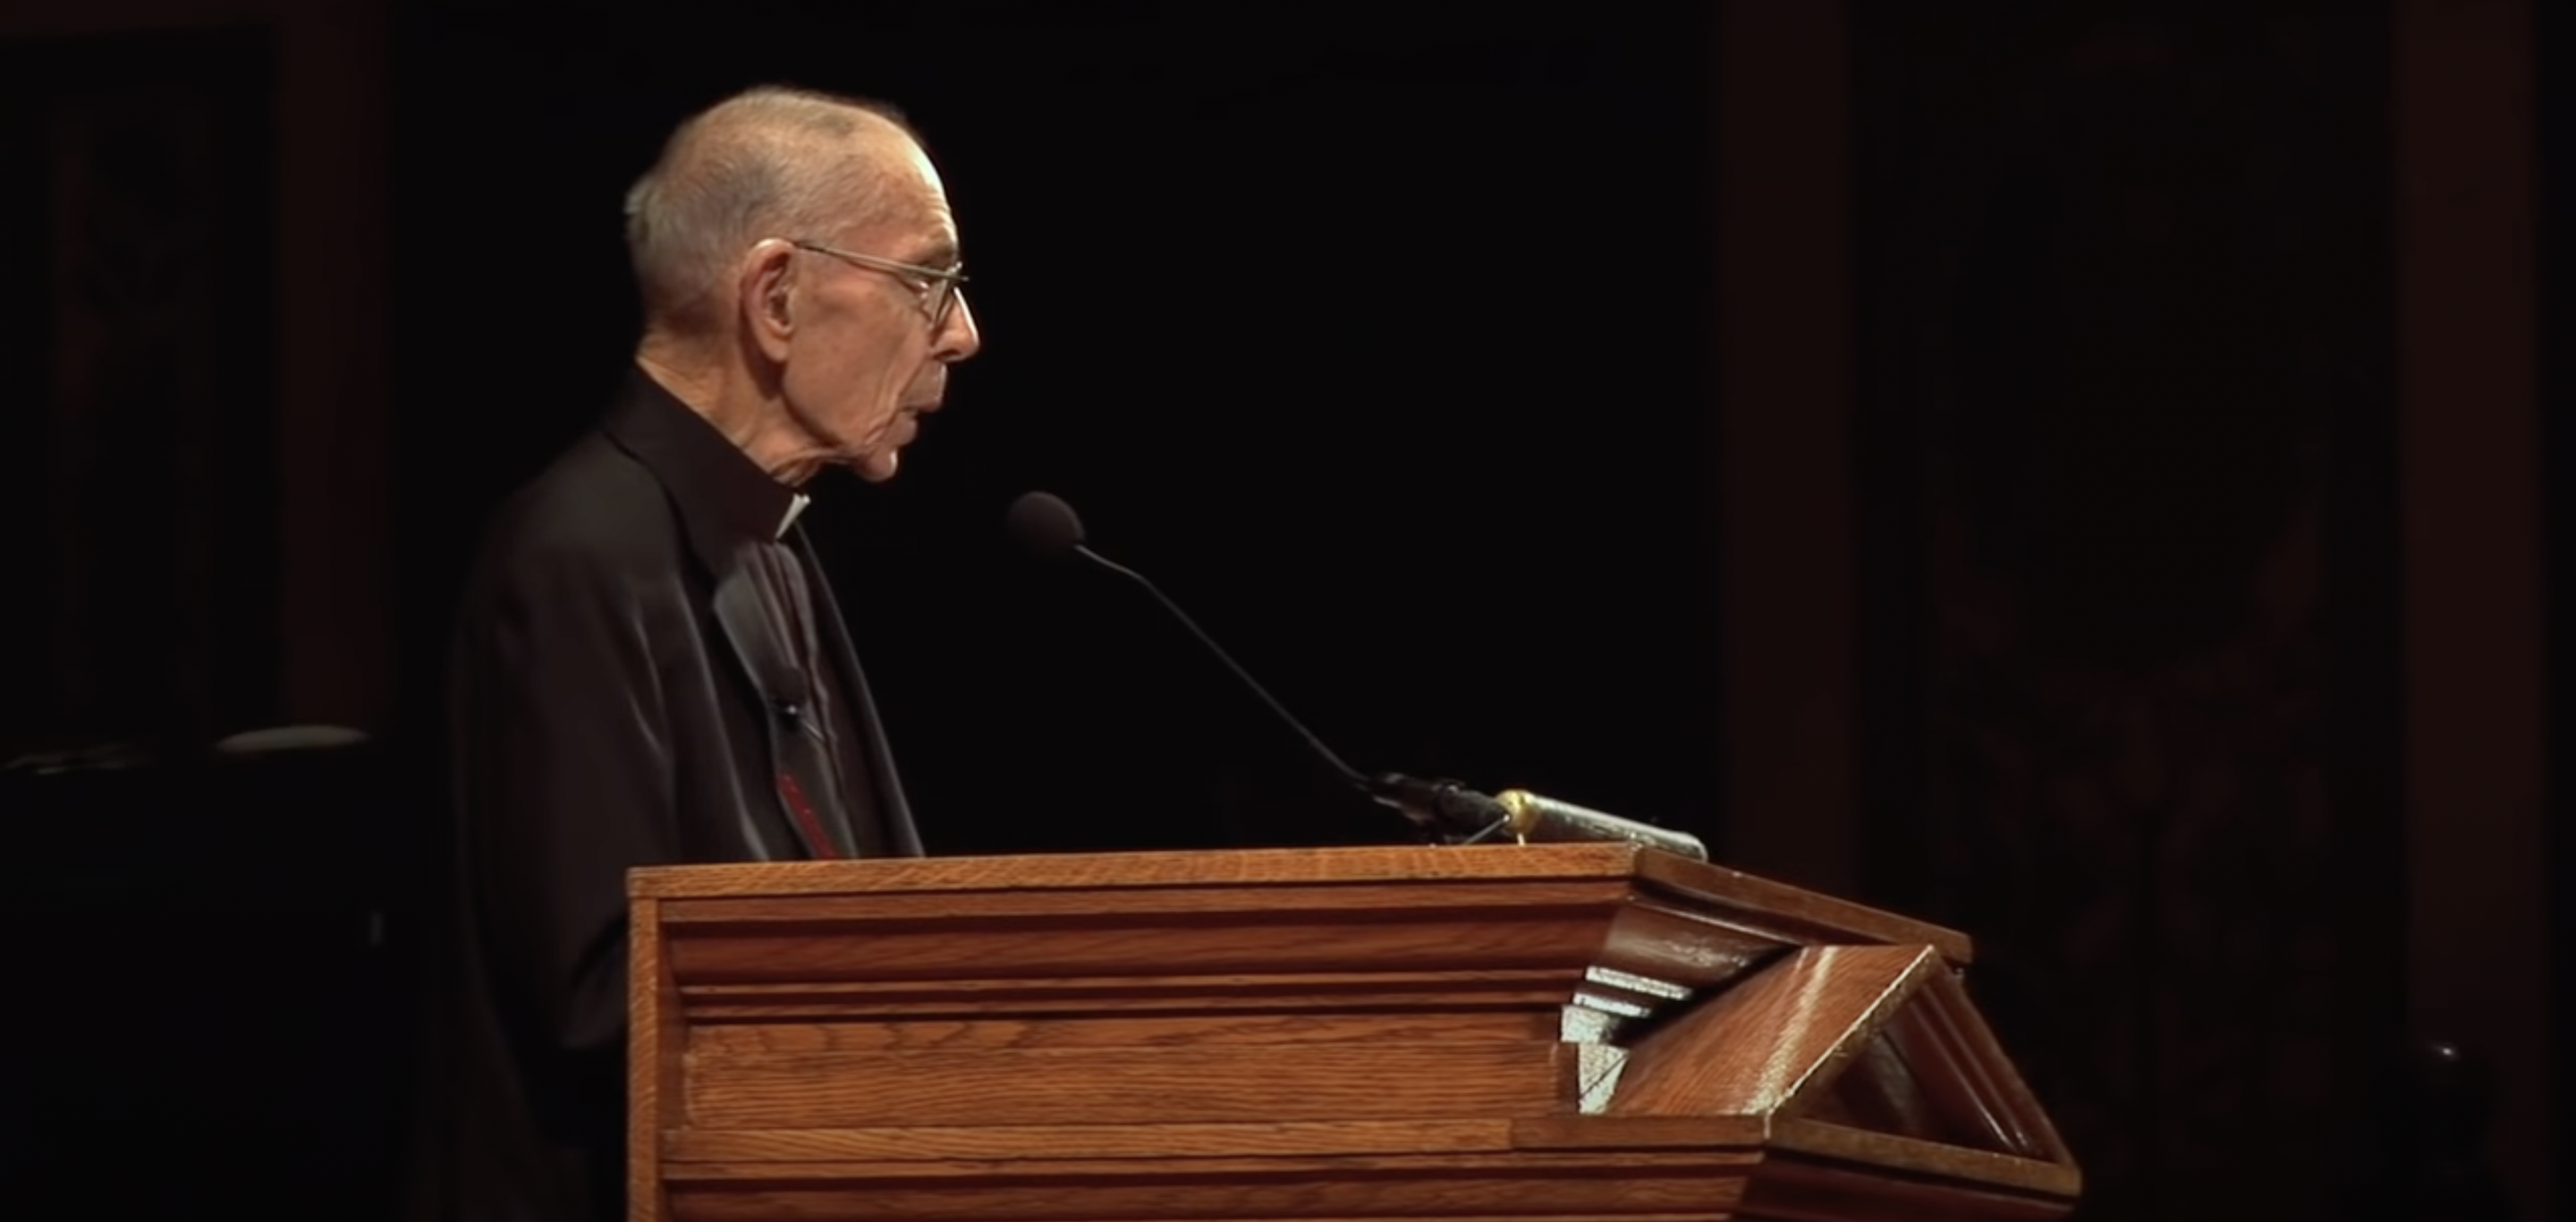 Father James V. Schall delivering his final lecture in 2012 before retiring from Georgetown (Youtube screenshot)